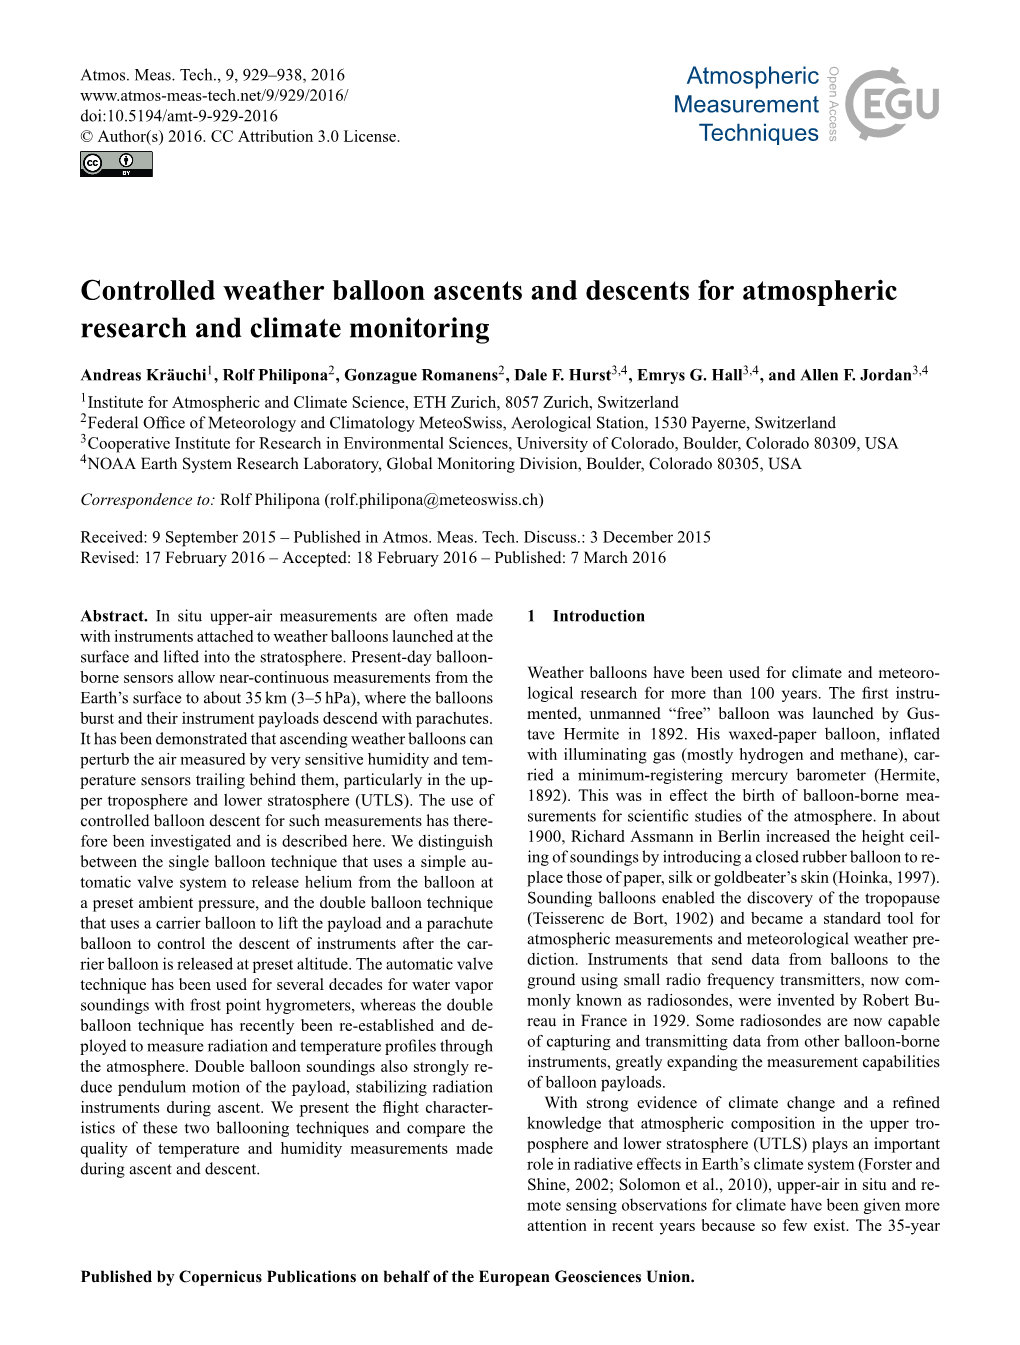 Controlled Weather Balloon Ascents and Descents for Atmospheric Research and Climate Monitoring